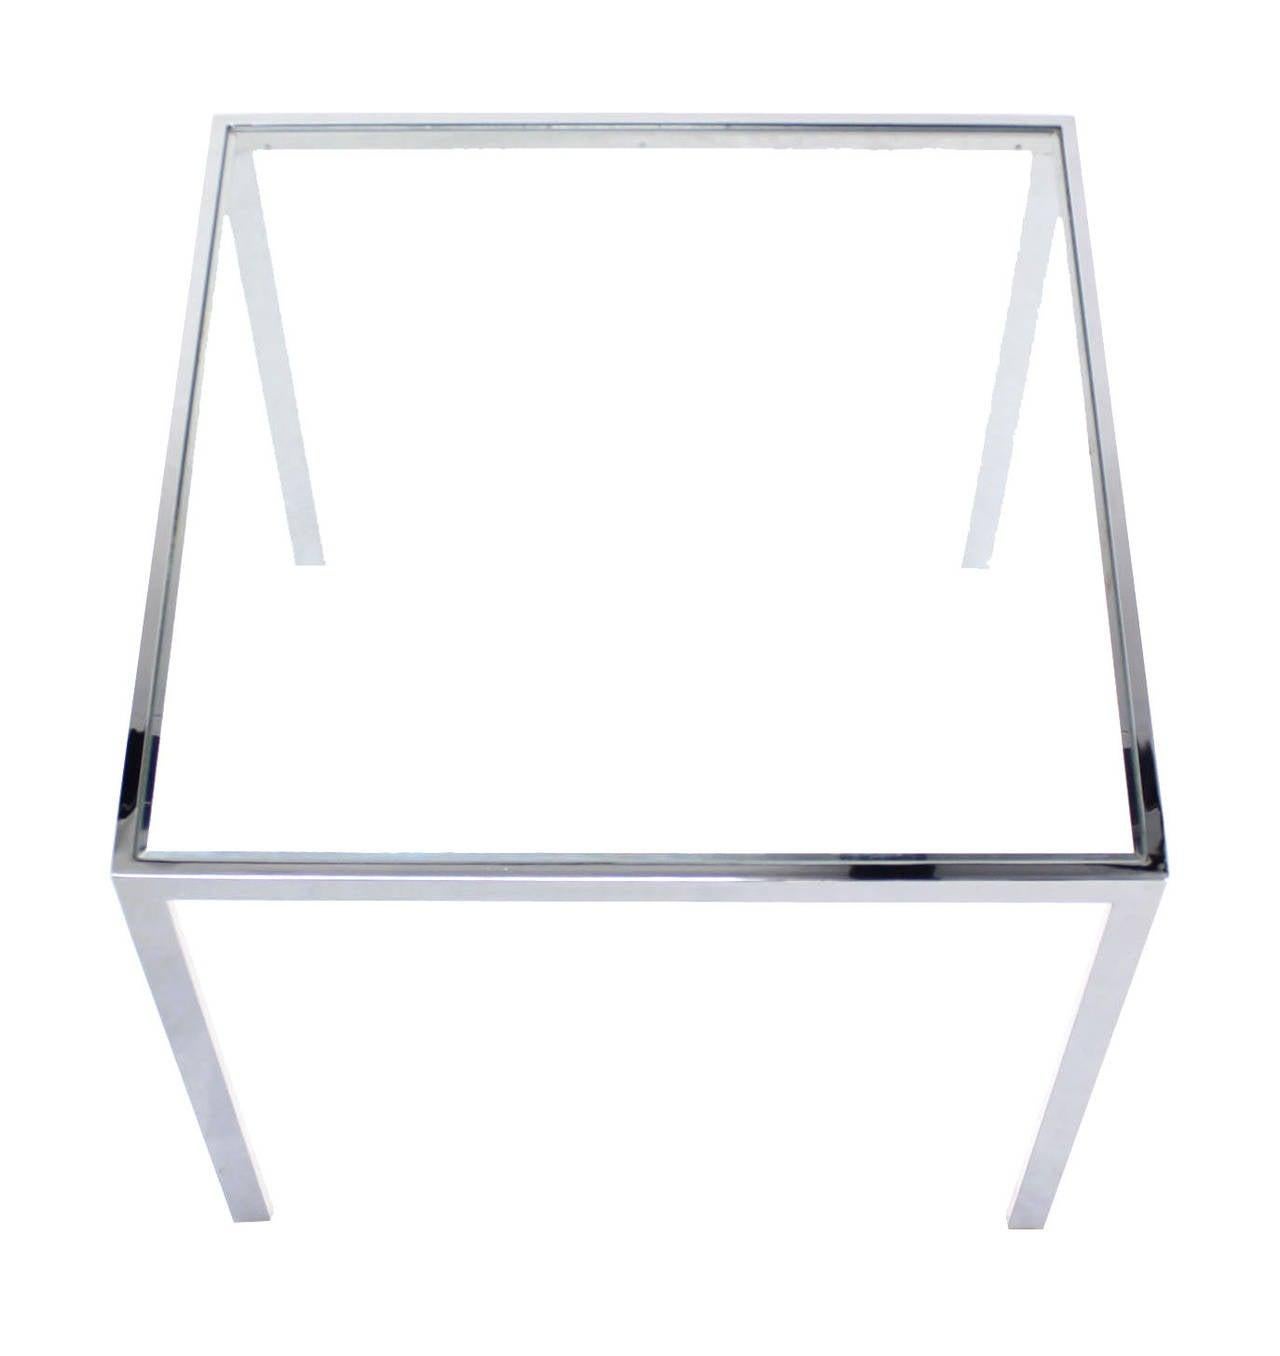 Square Cube Chrome Glass Top Game Small Dinning Dinette Table Bauhaus MINT!